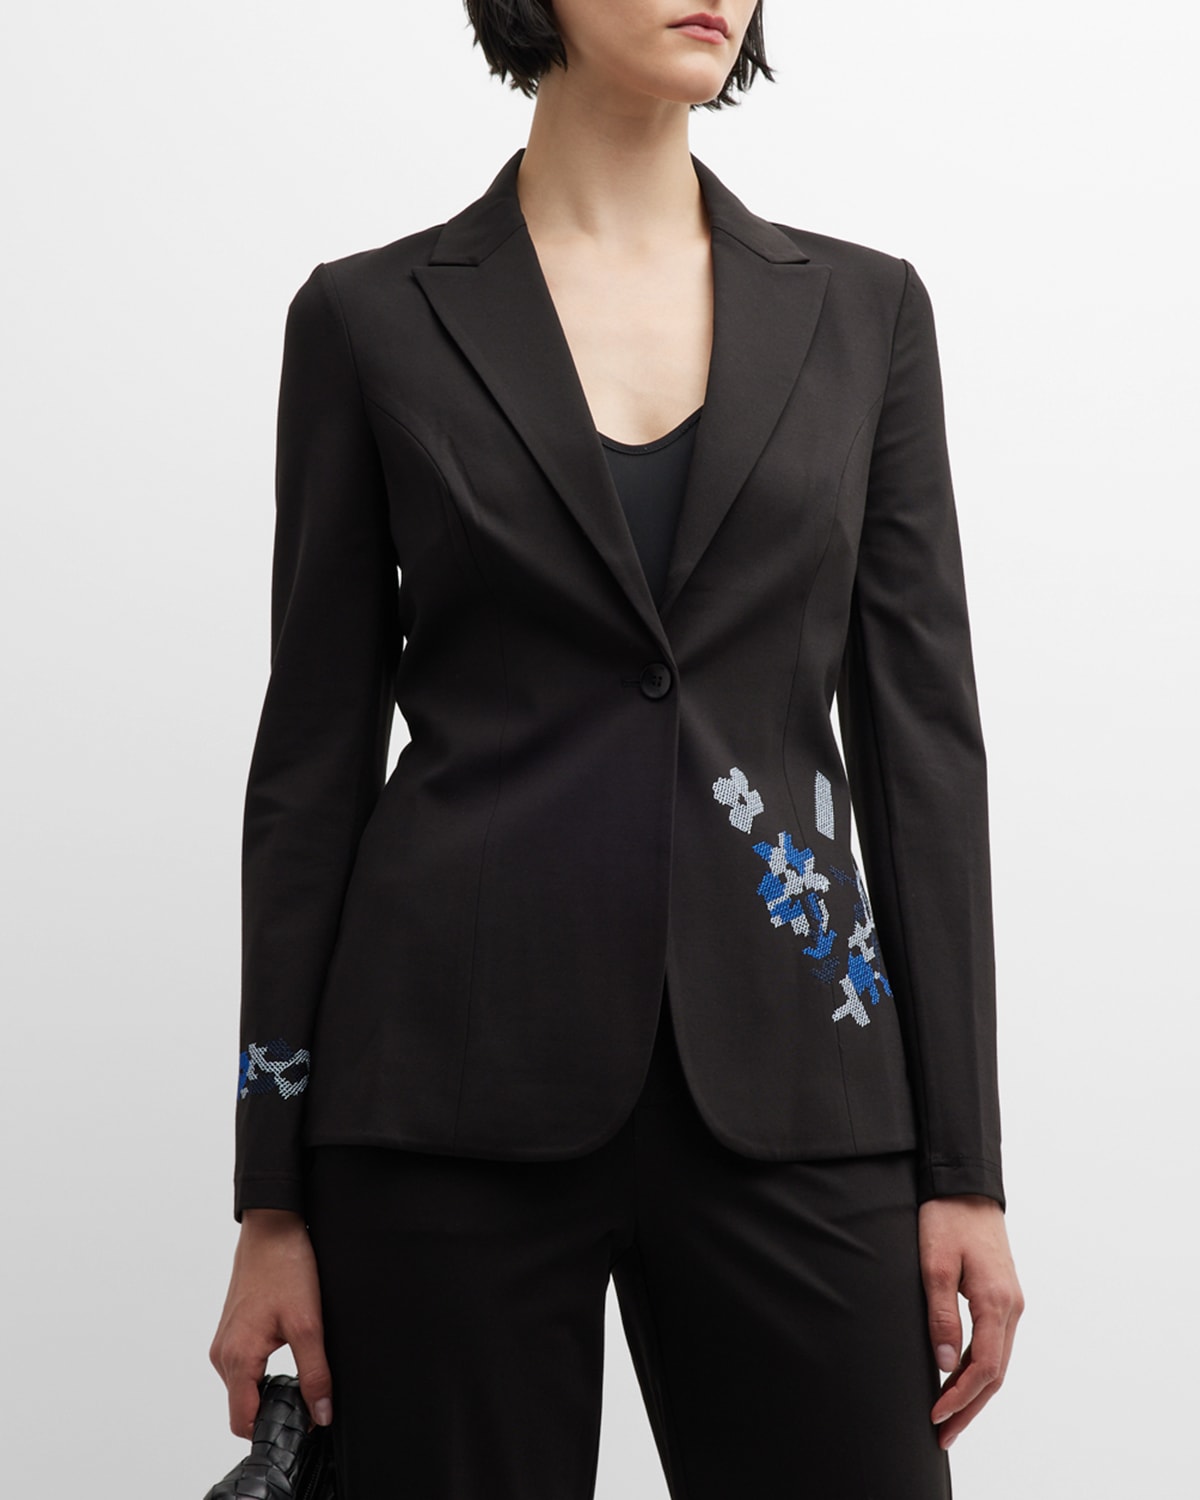 The Fortuna Embroidered Jacket